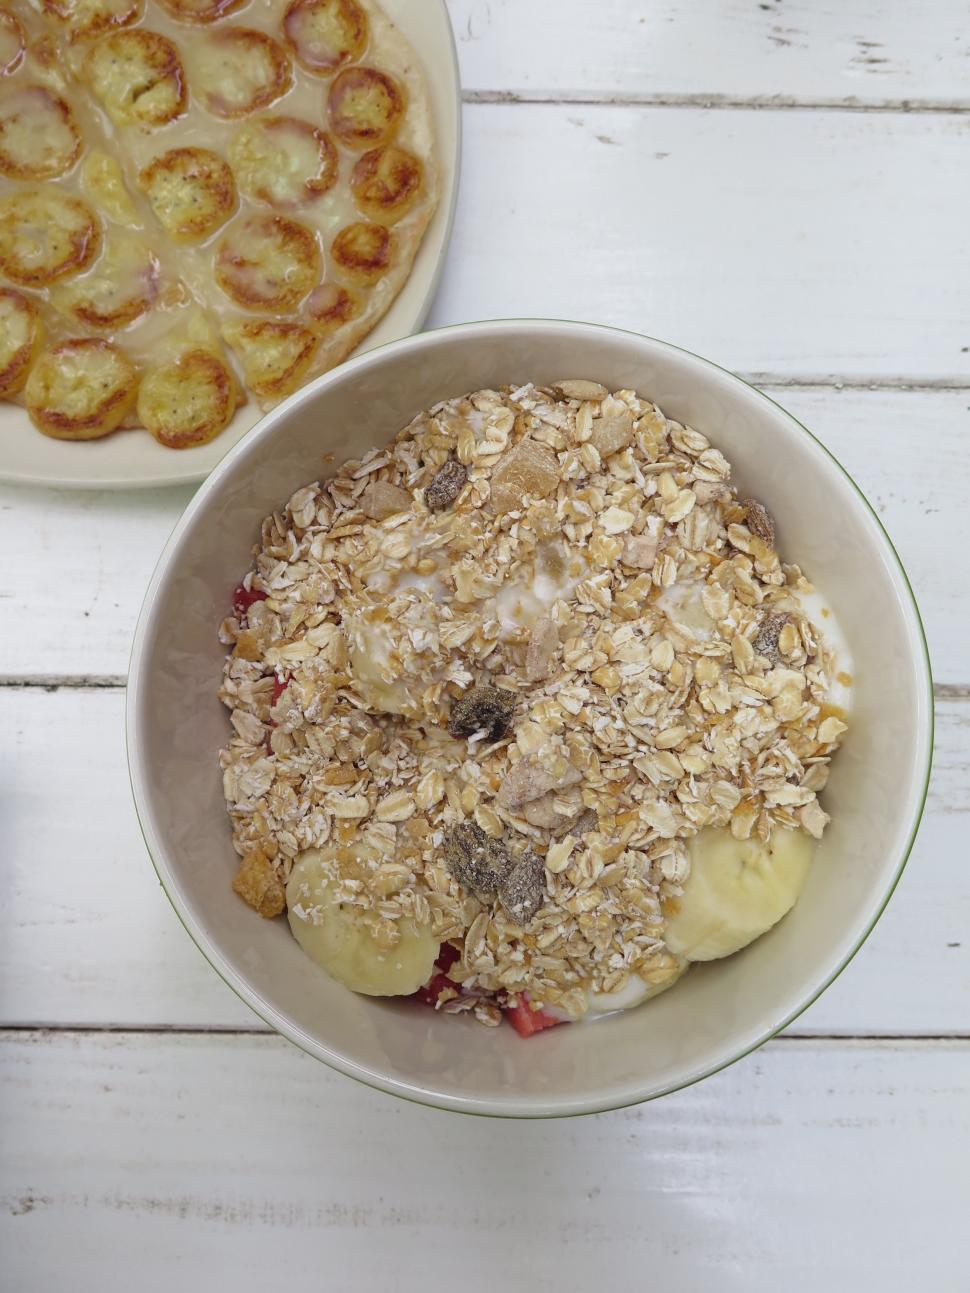 Free Image of Oatmeal and Fruit Bowls 